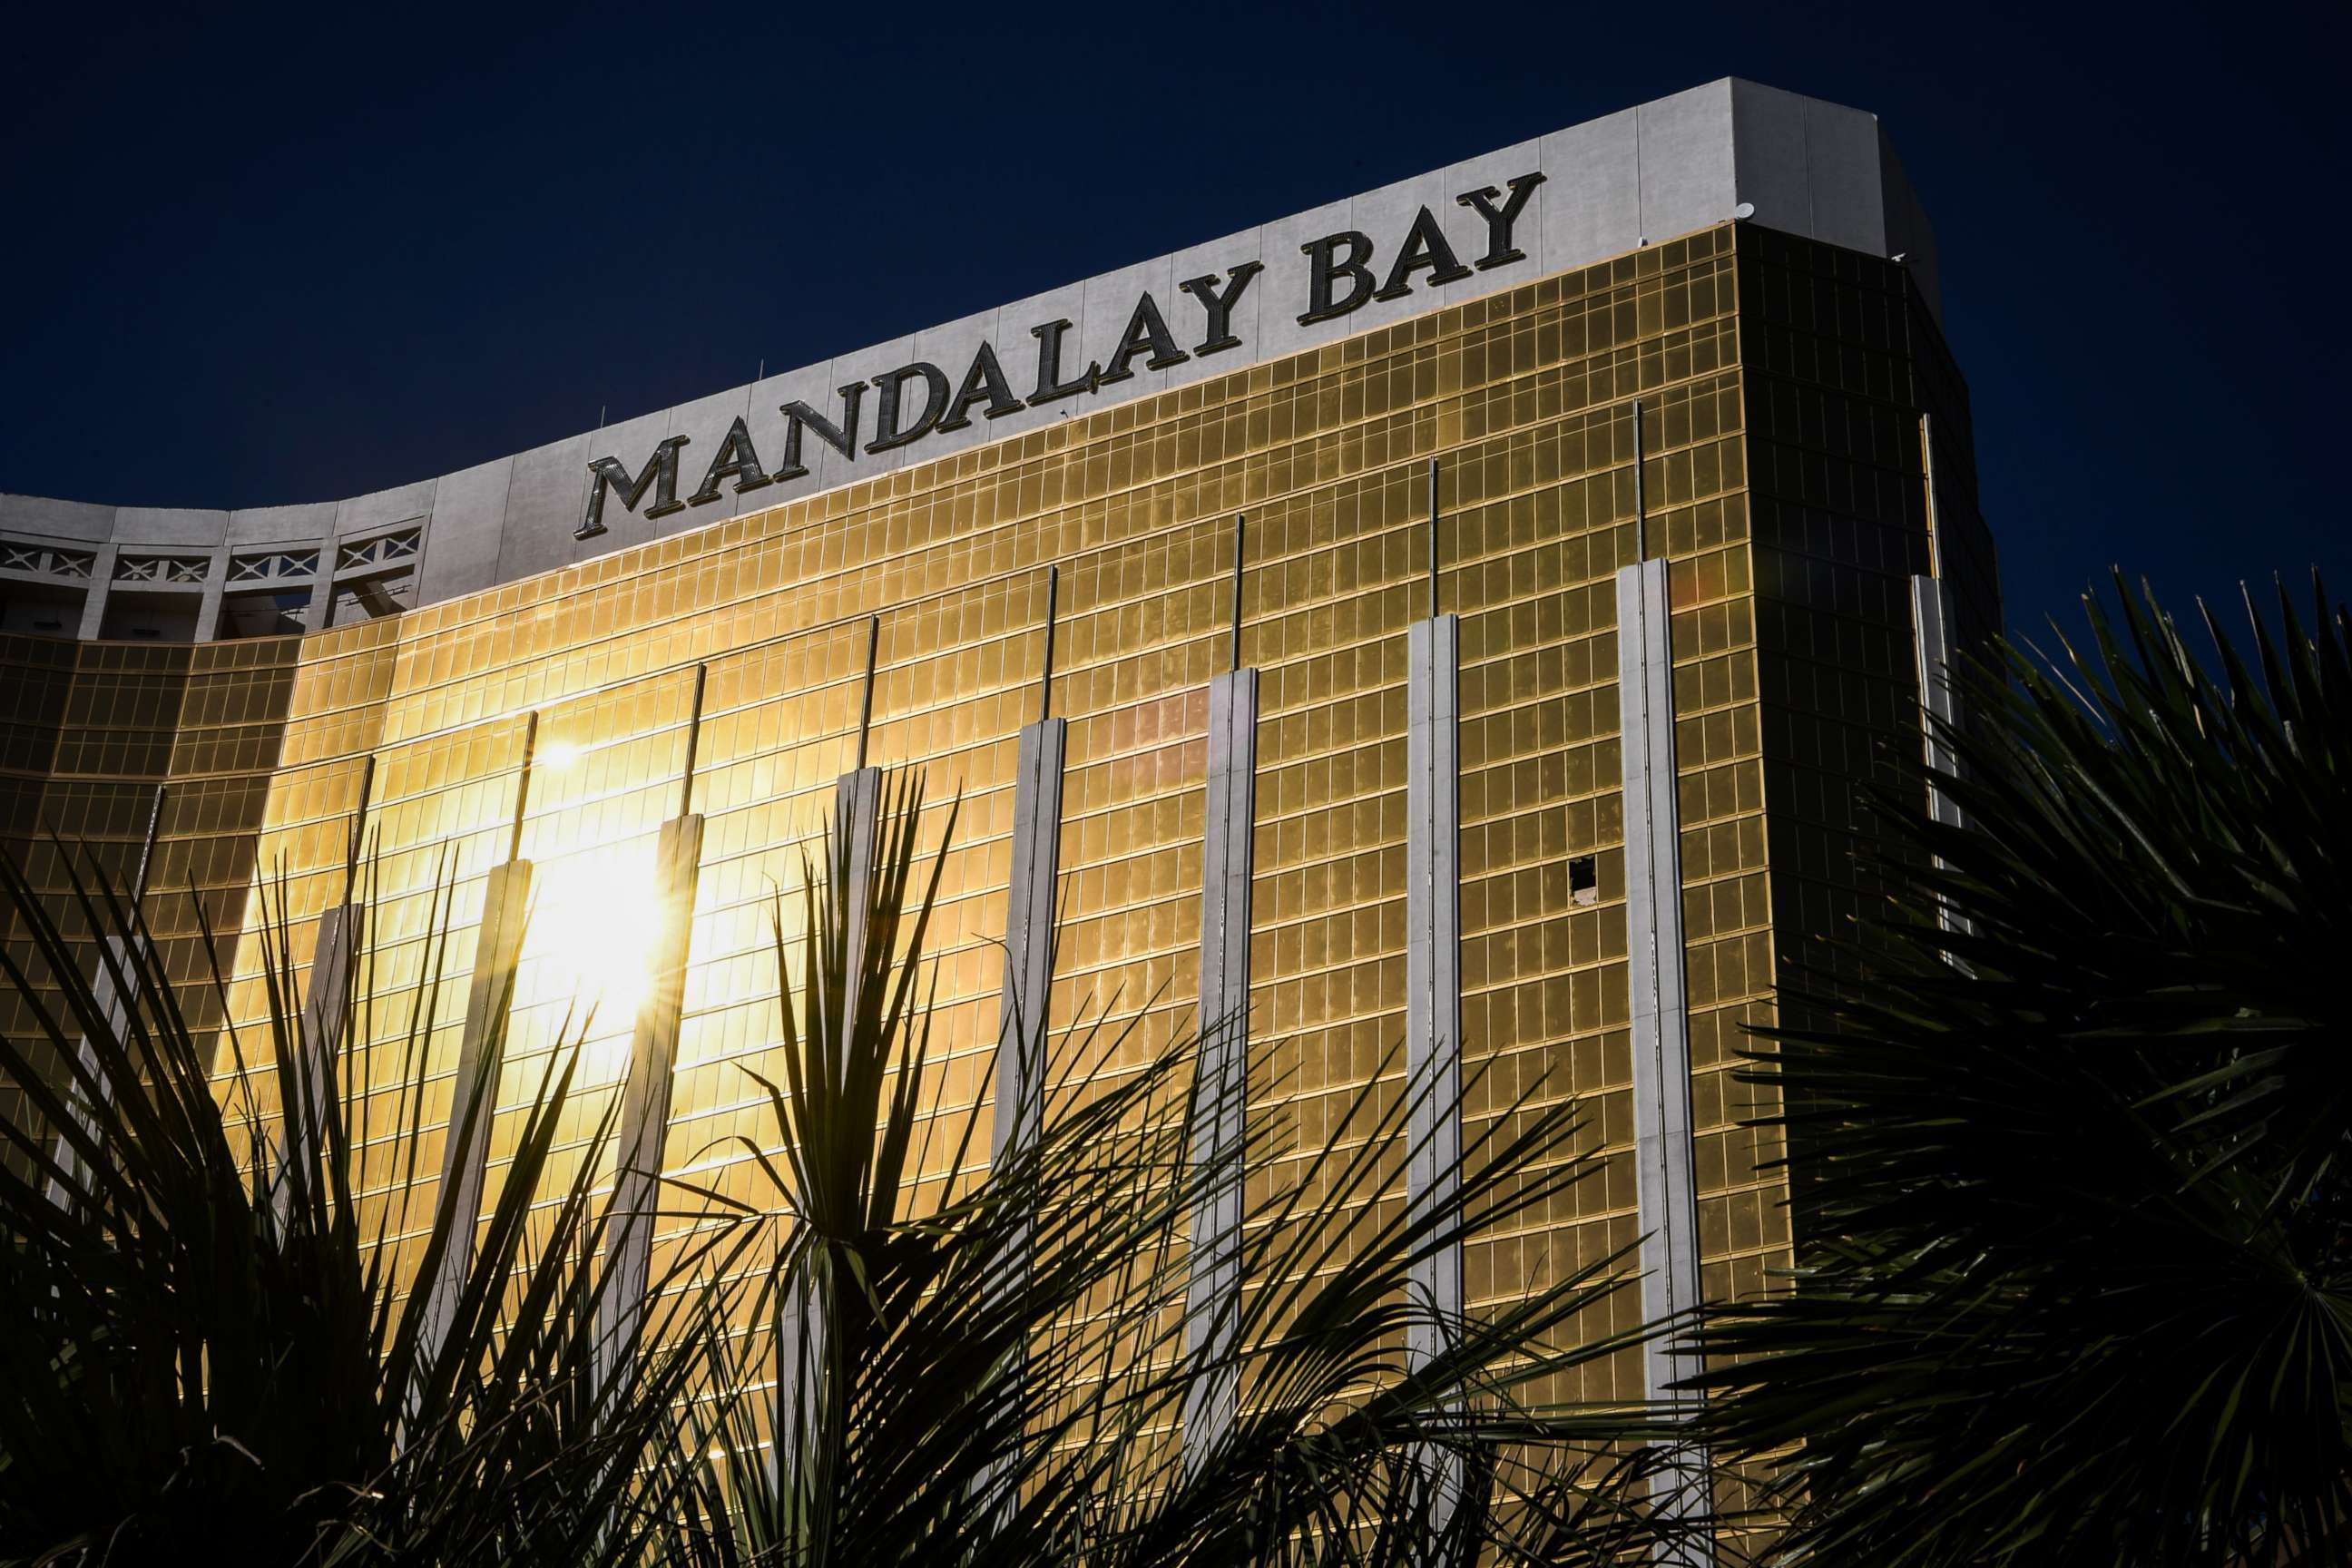 PHOTO: The broken window on the 32nd floor of the Mandalay Bay Hotel and Casino where Stephen Paddock, the gunman who killed 59 people and wounded more than 500 is seen on Oct. 4, 2017, in Las Vegas.